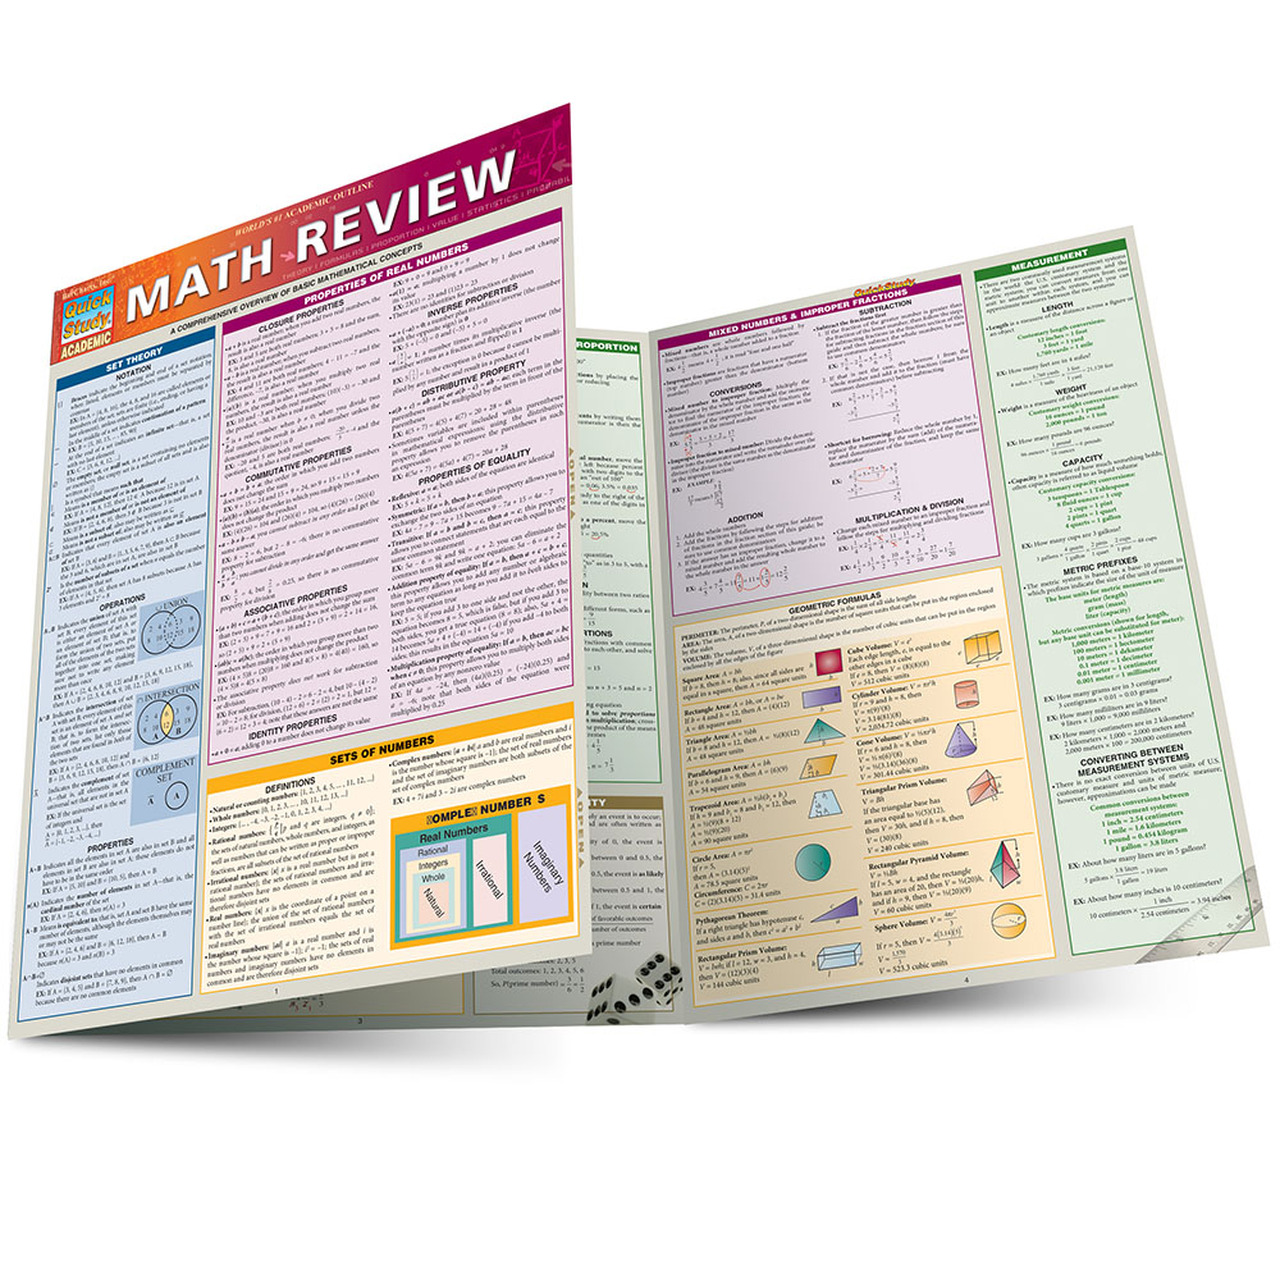 Quickstudy Math Review Laminated Study Guide